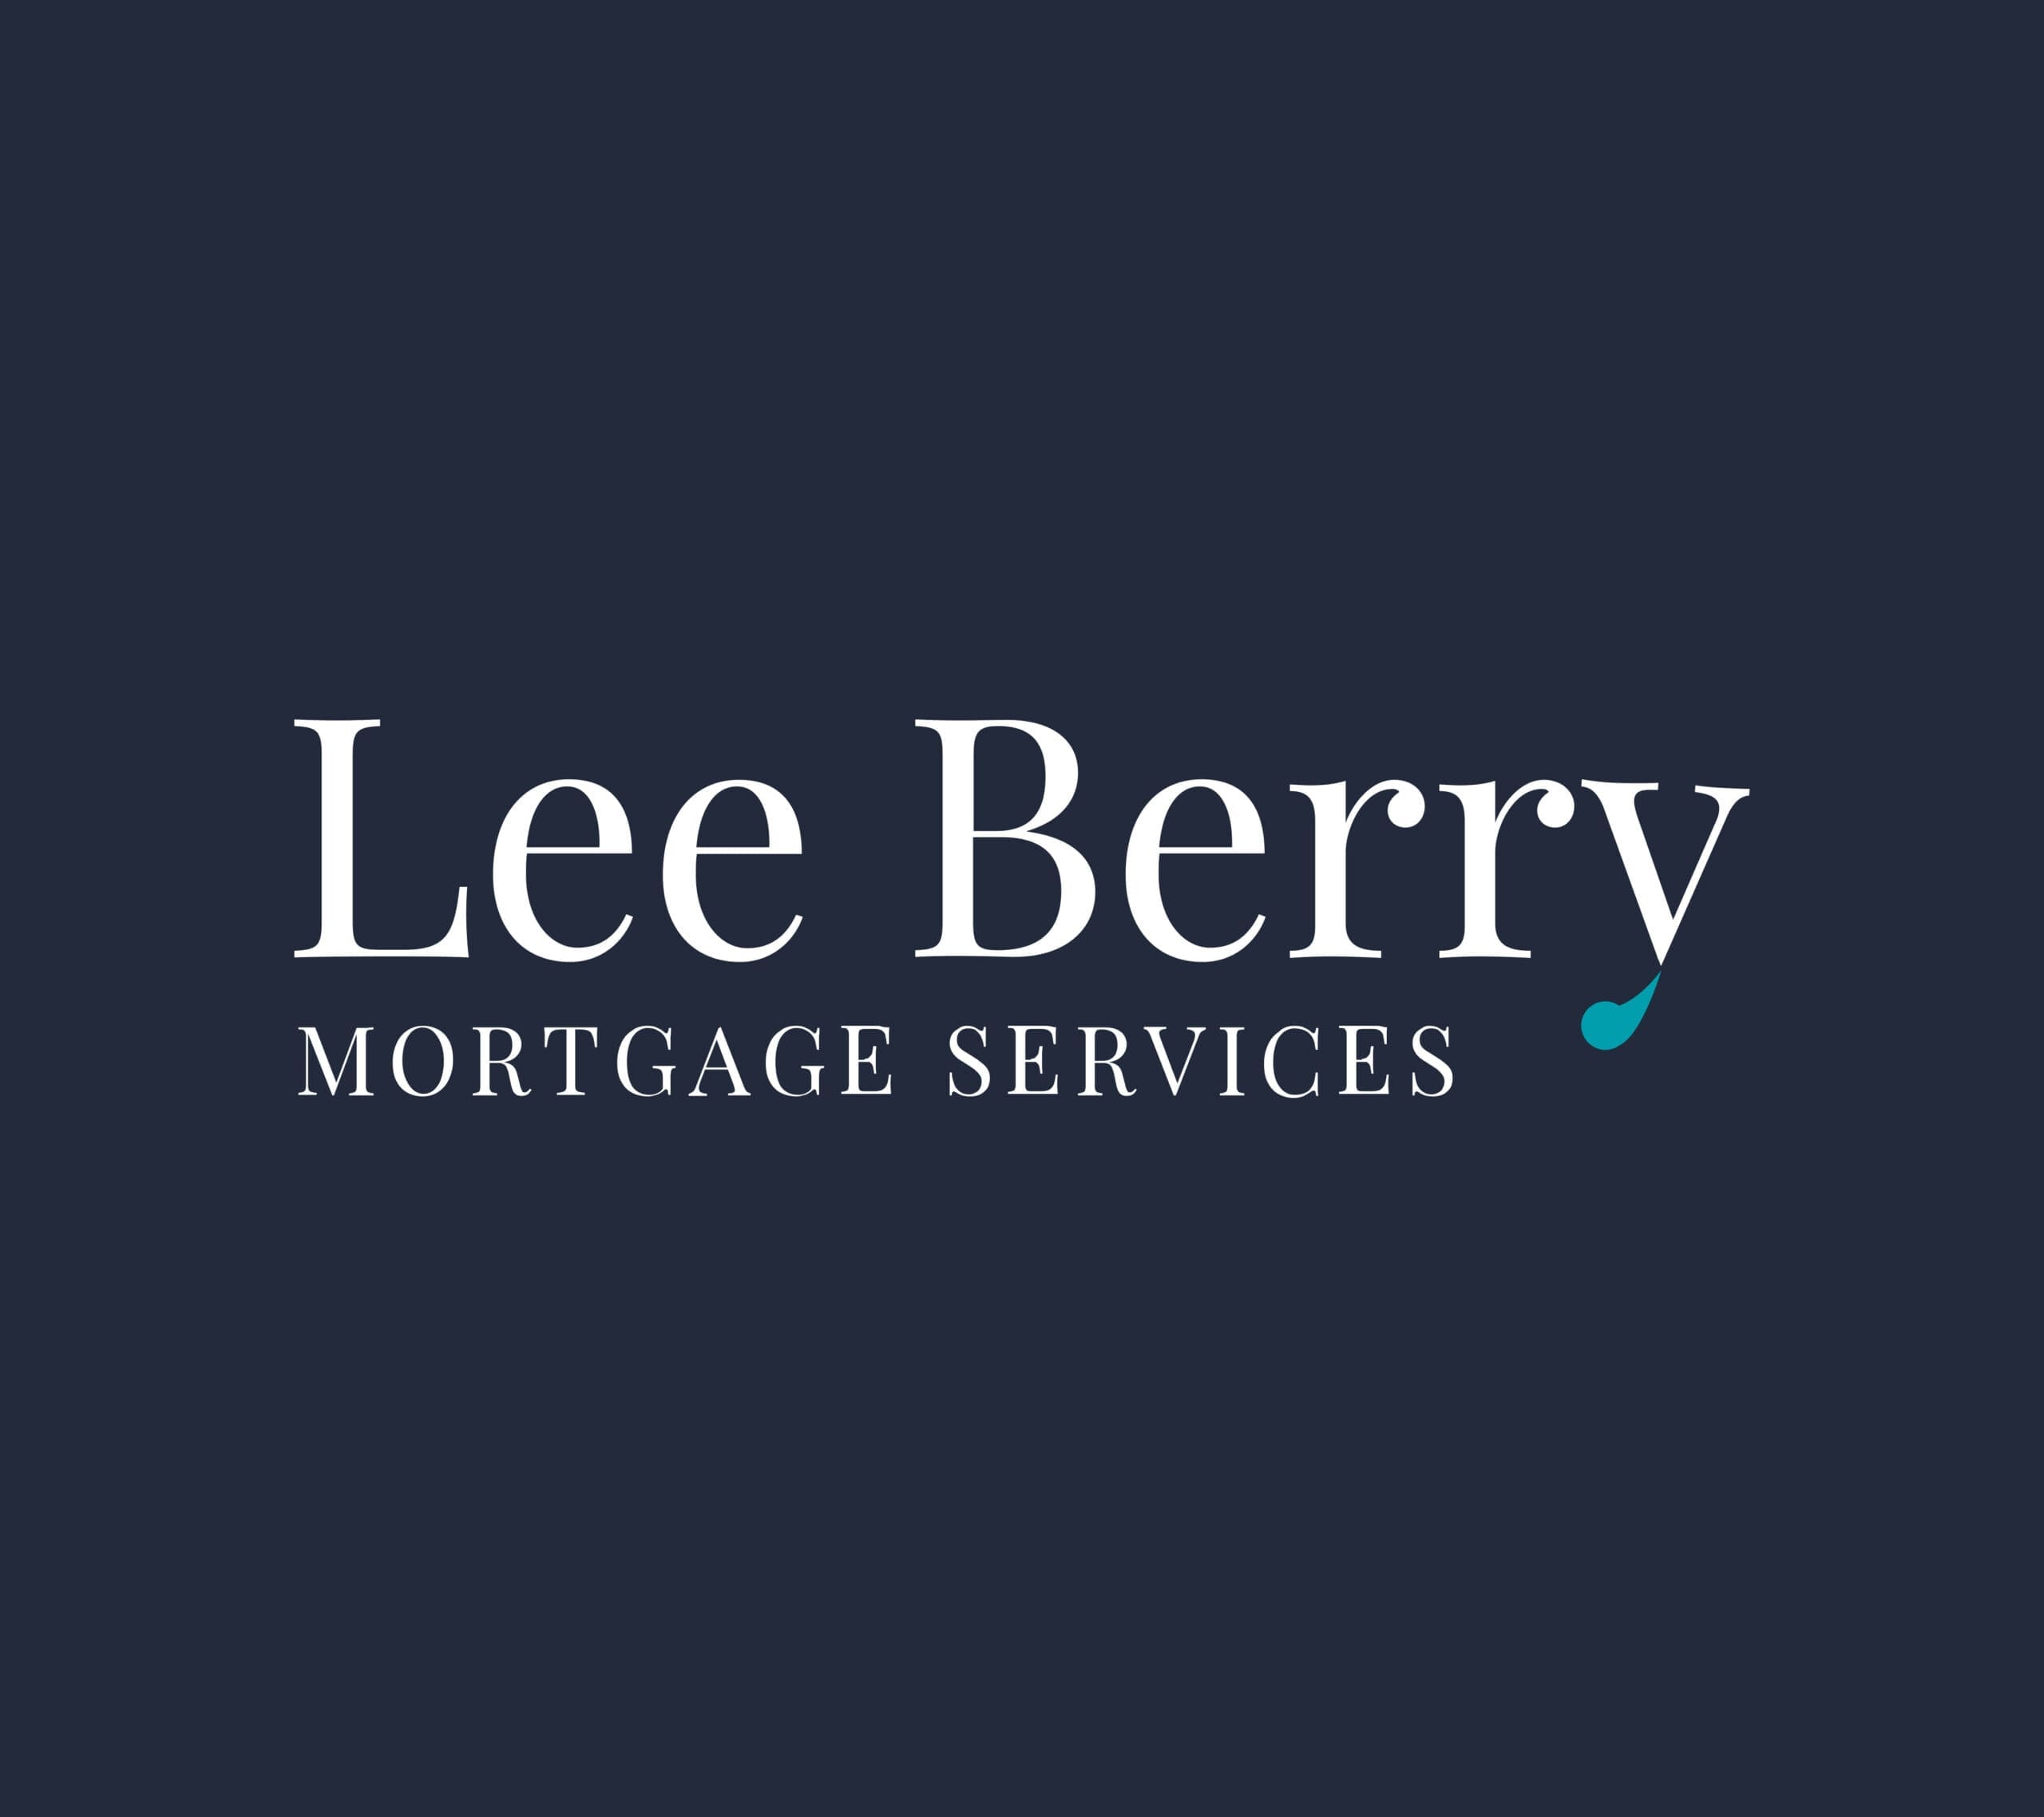 The logo for Lee Berry Mortgage Services, designed by a freelance web designer from Essex.